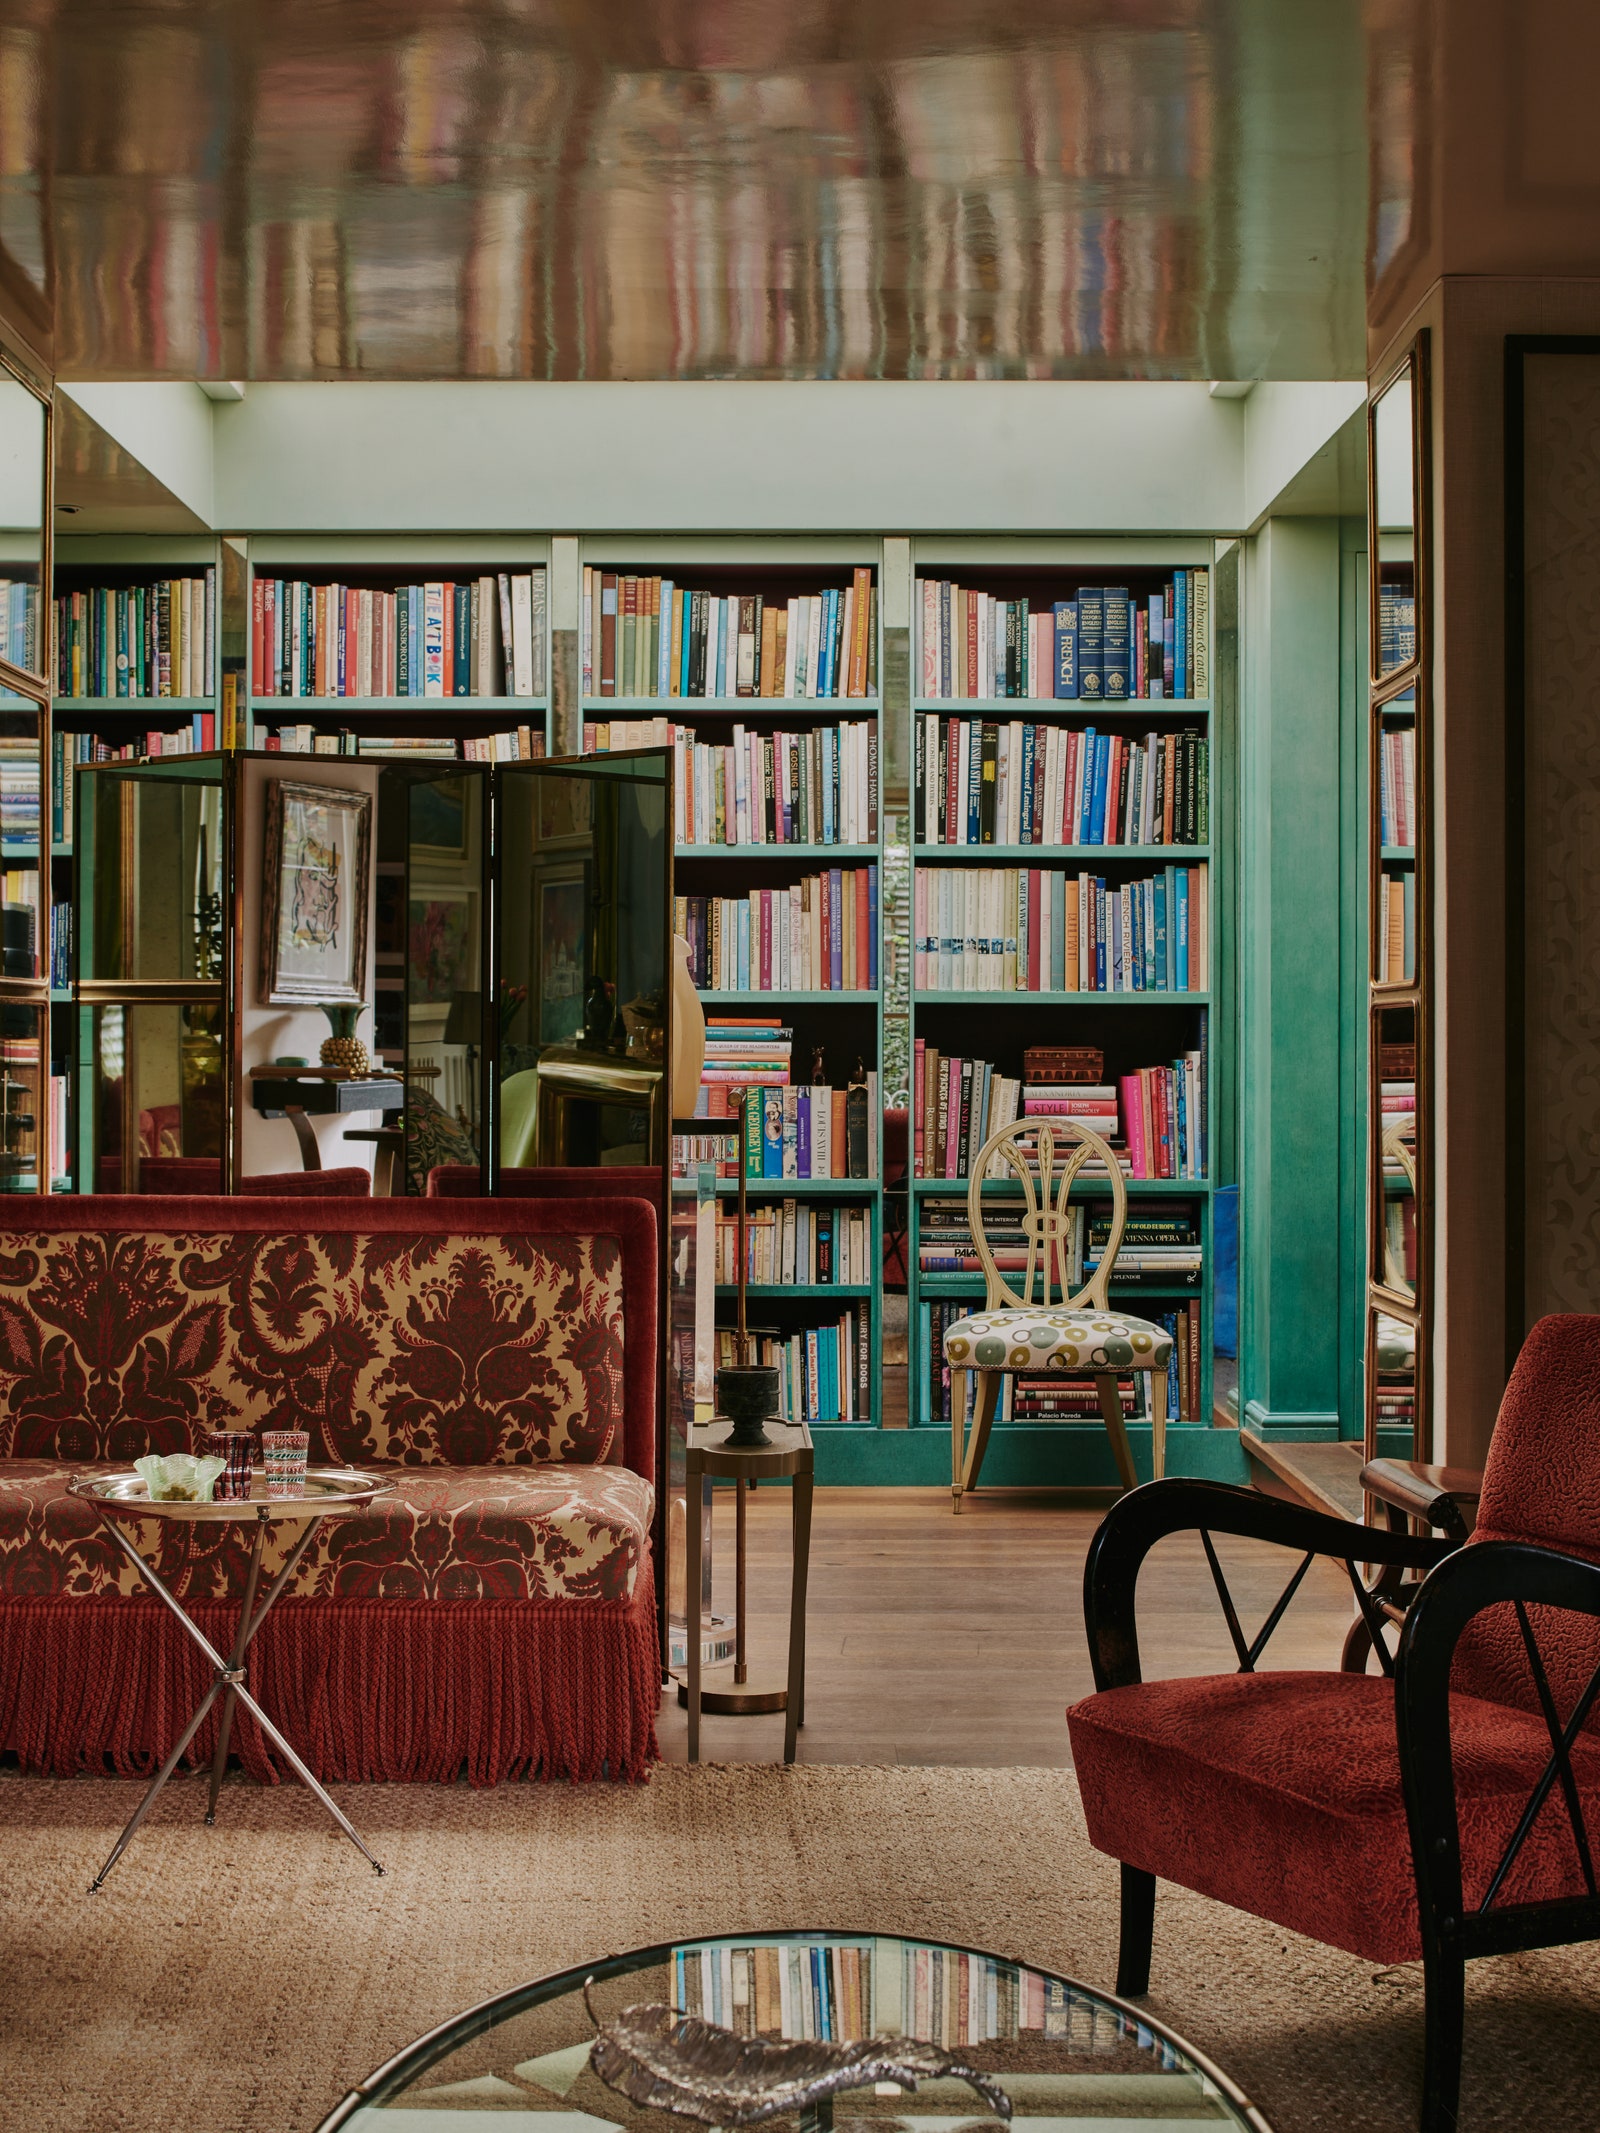 10 more of the most beautiful rooms in Britain and what we can learn from their clever design